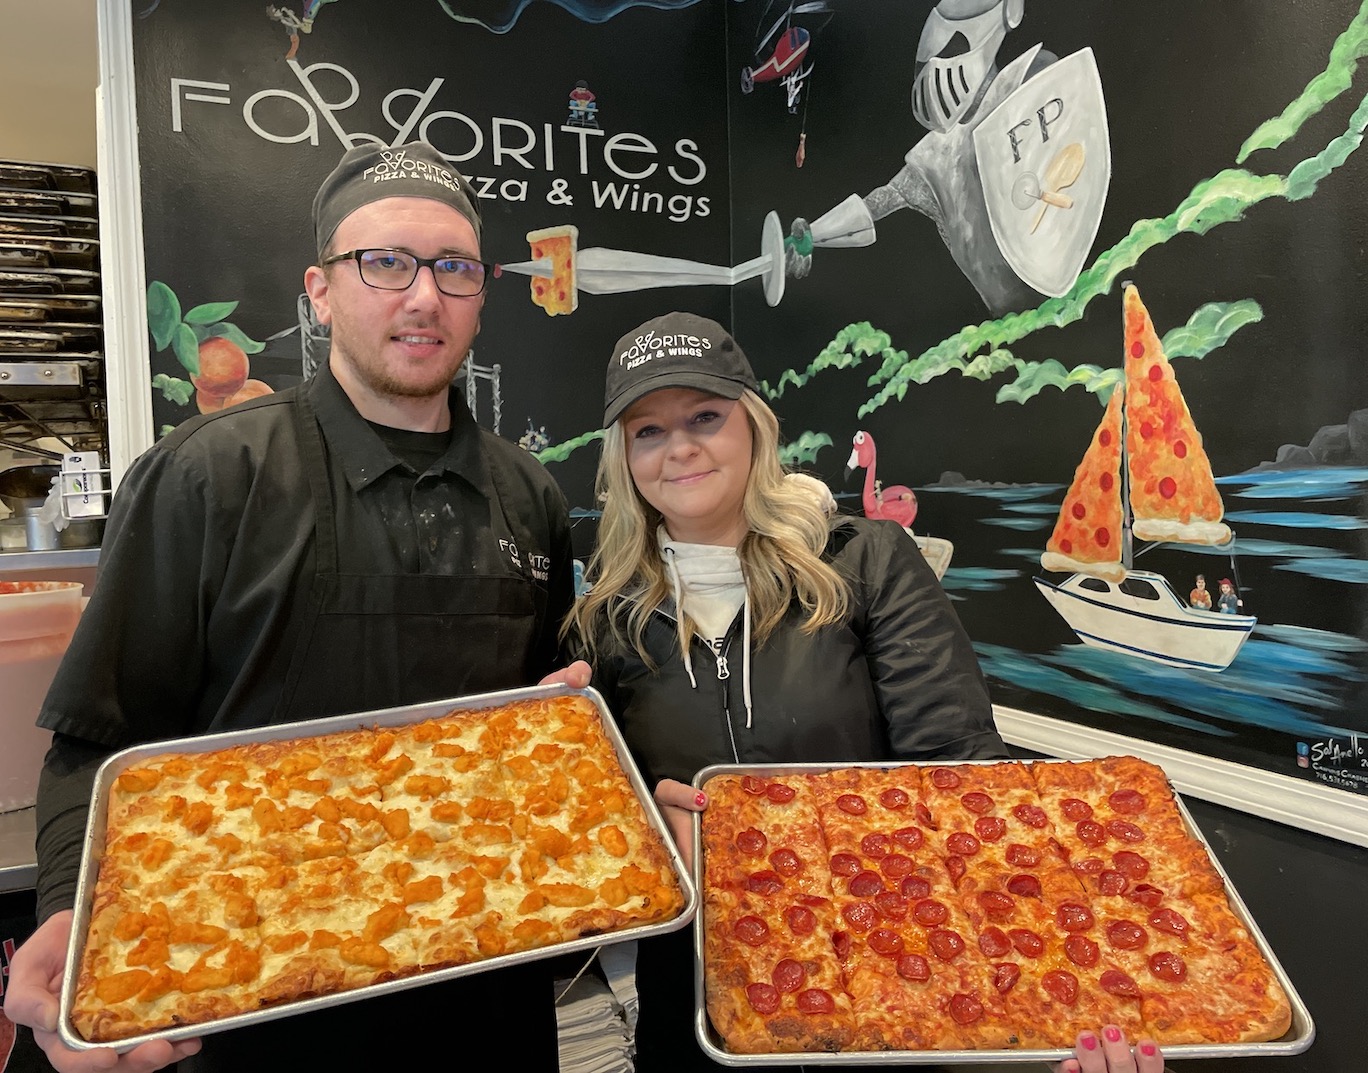 Favorites Pizza & Wings managers Austin Regis and Aurora Campbell show off some of WNY's Best Pizza.